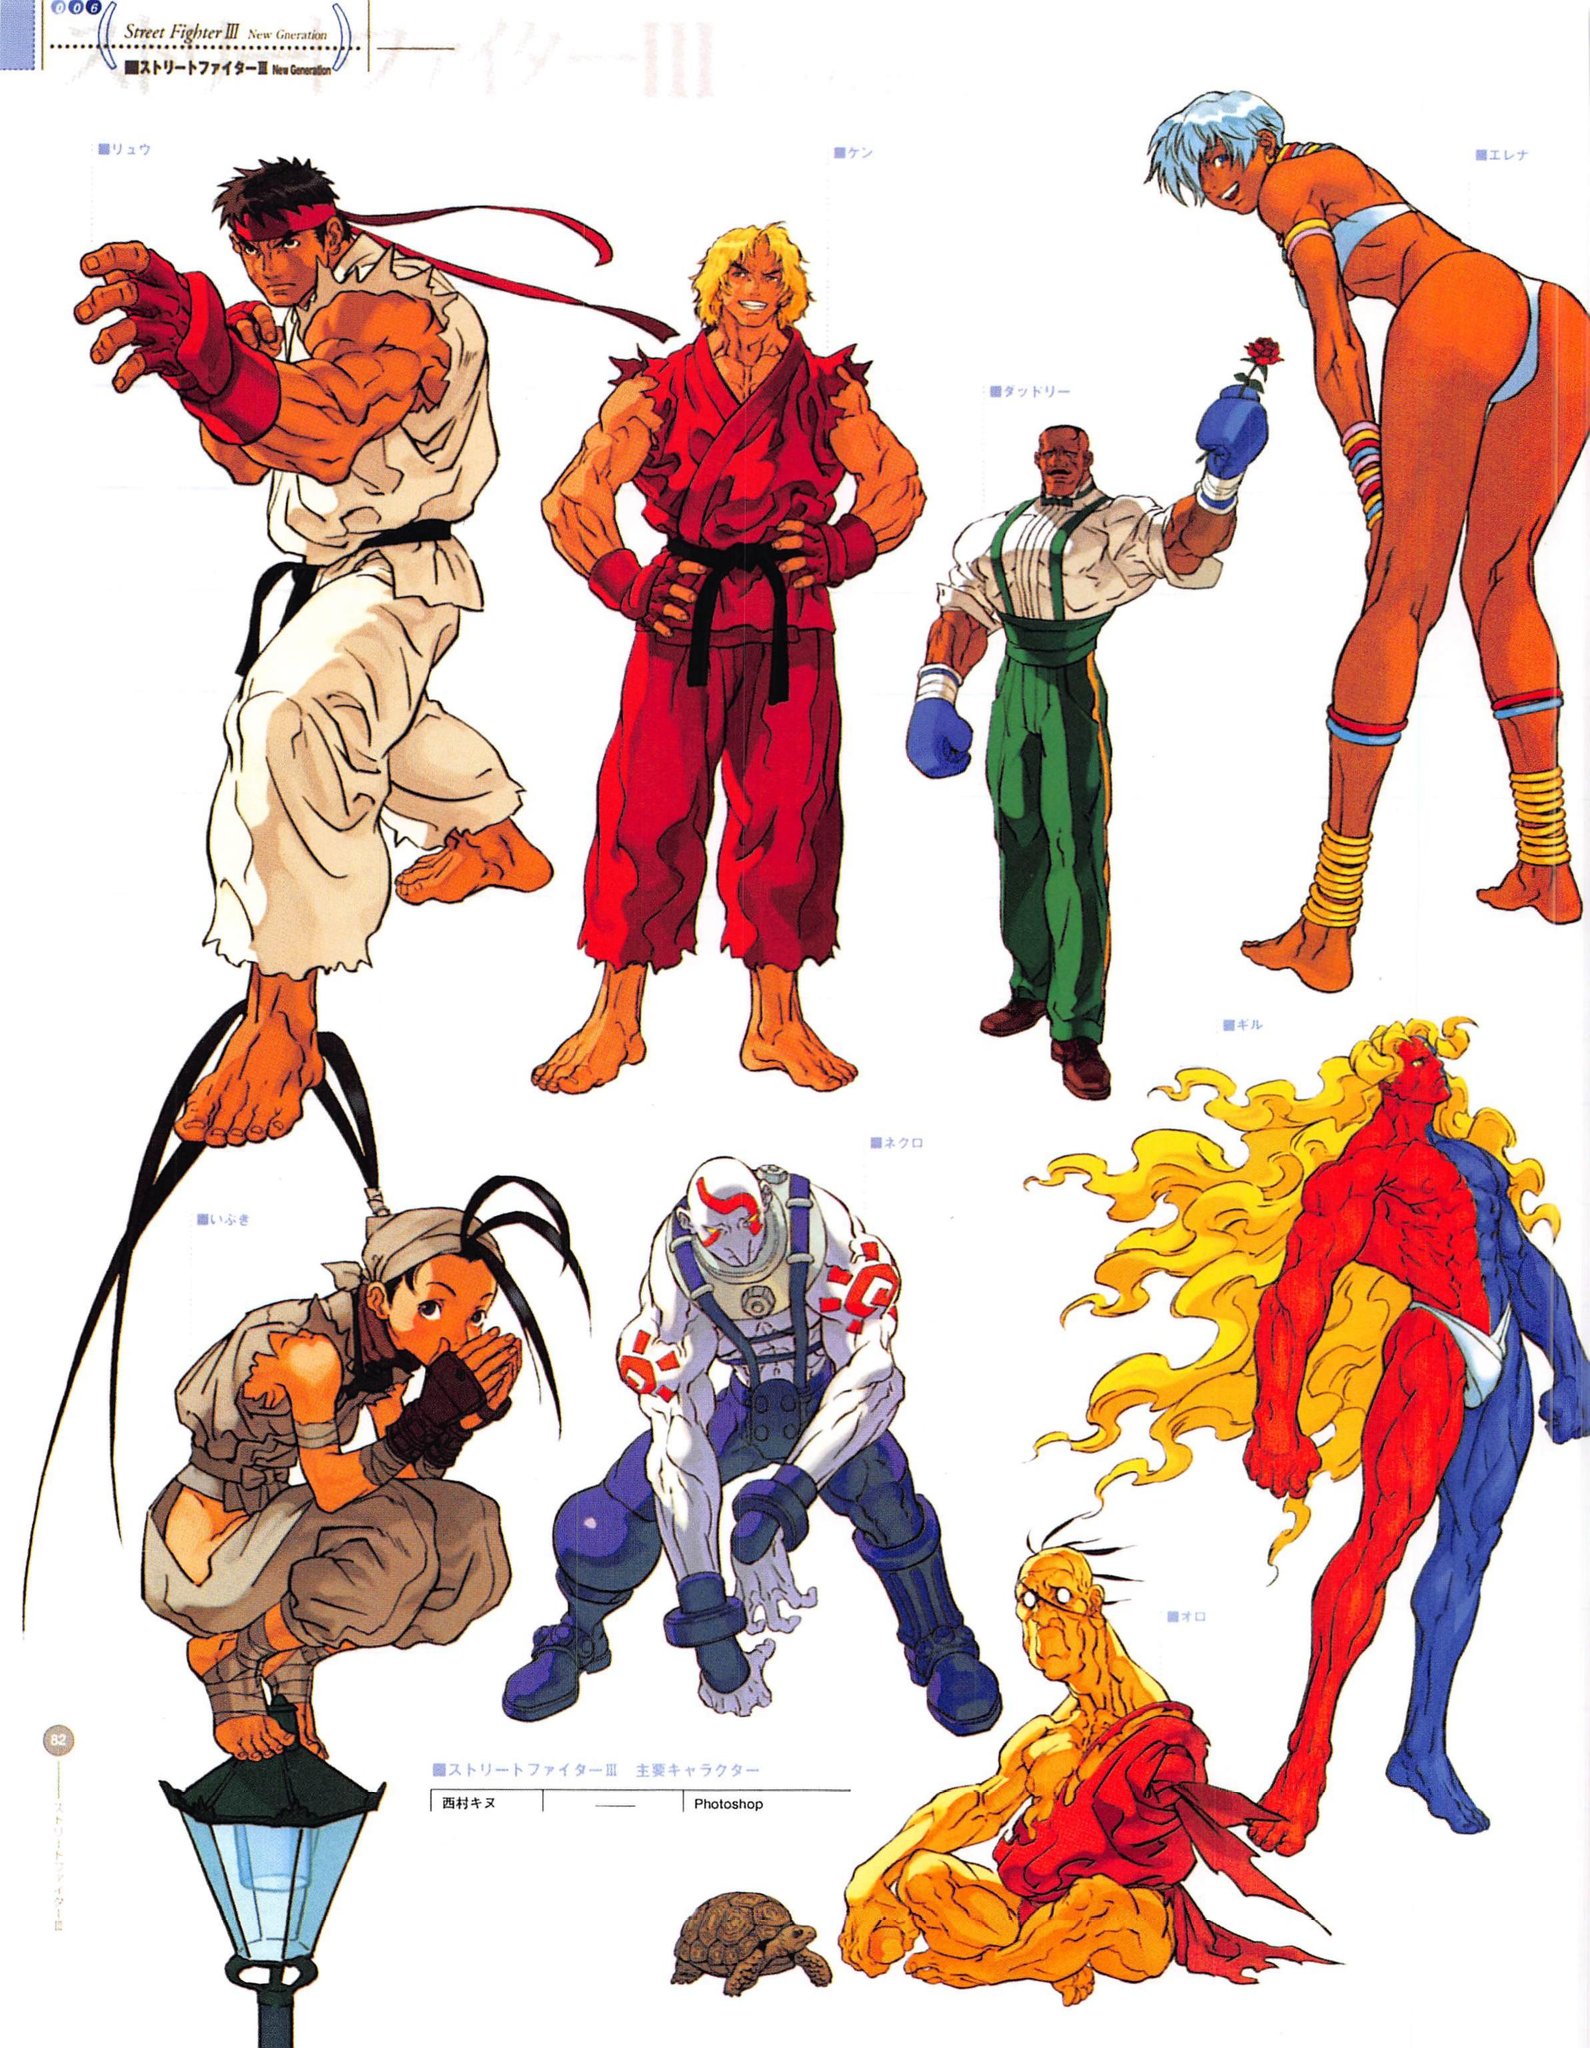 Image result for street fighter character designs  Street fighter  characters, Street fighter art, Street fighter